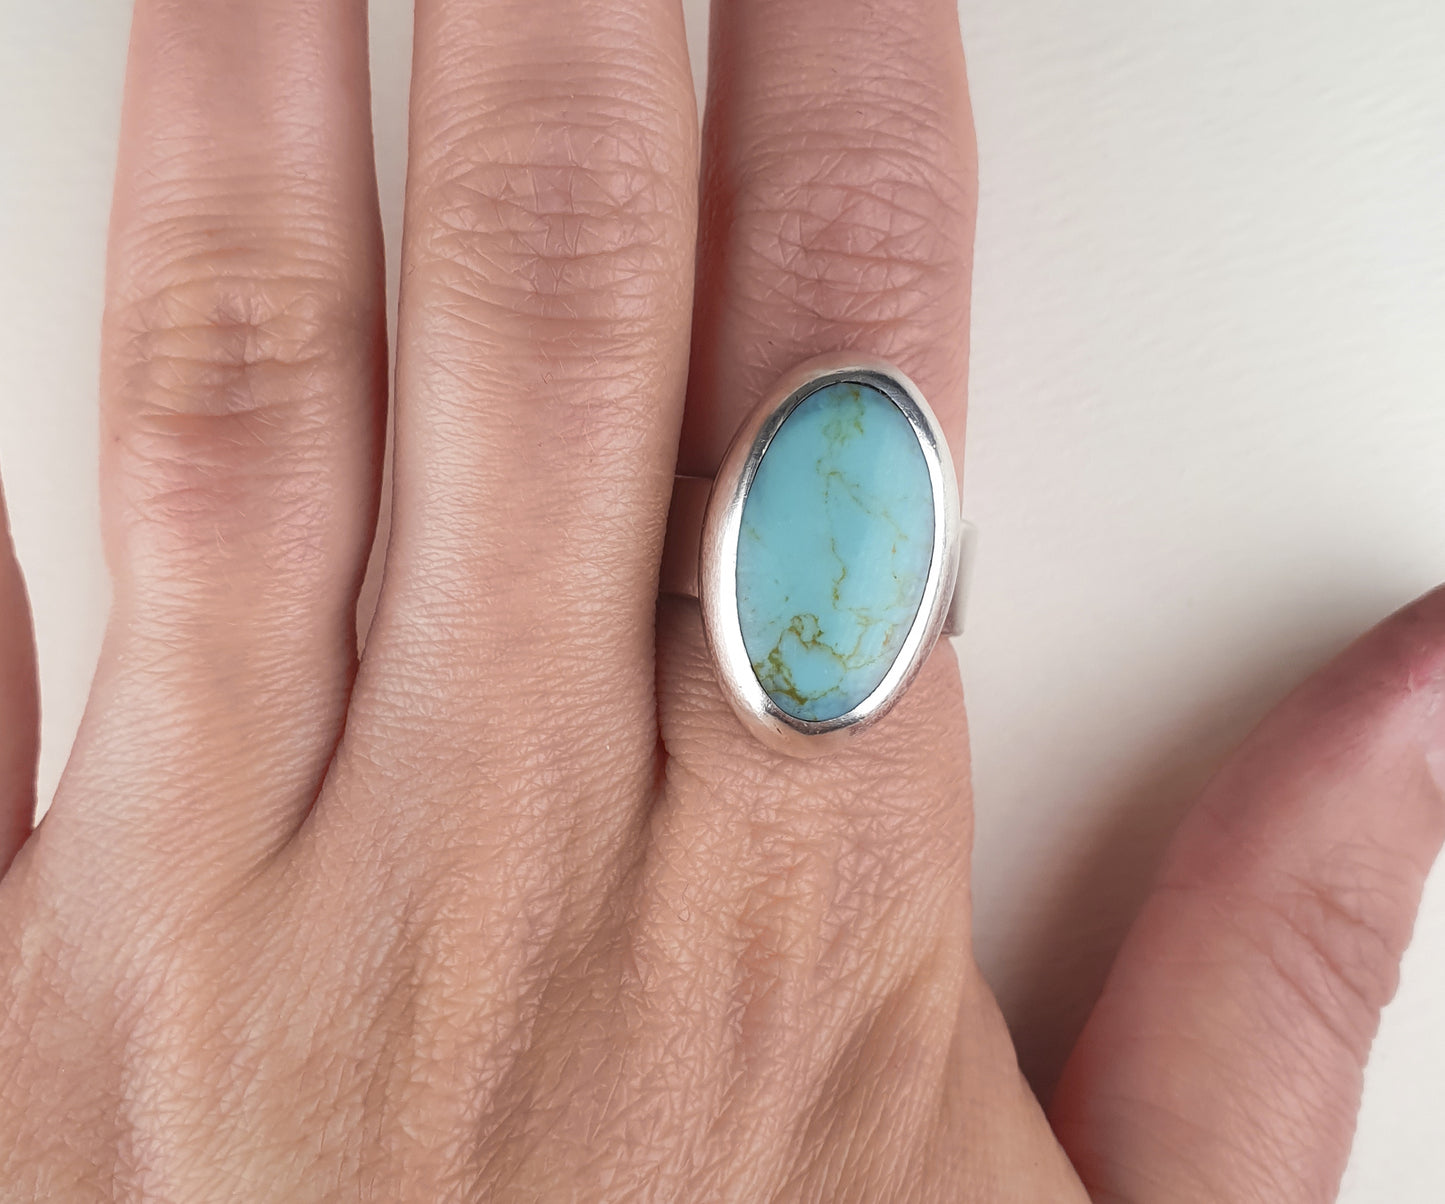 Vintage Mexican Turquoise Ring in Silver